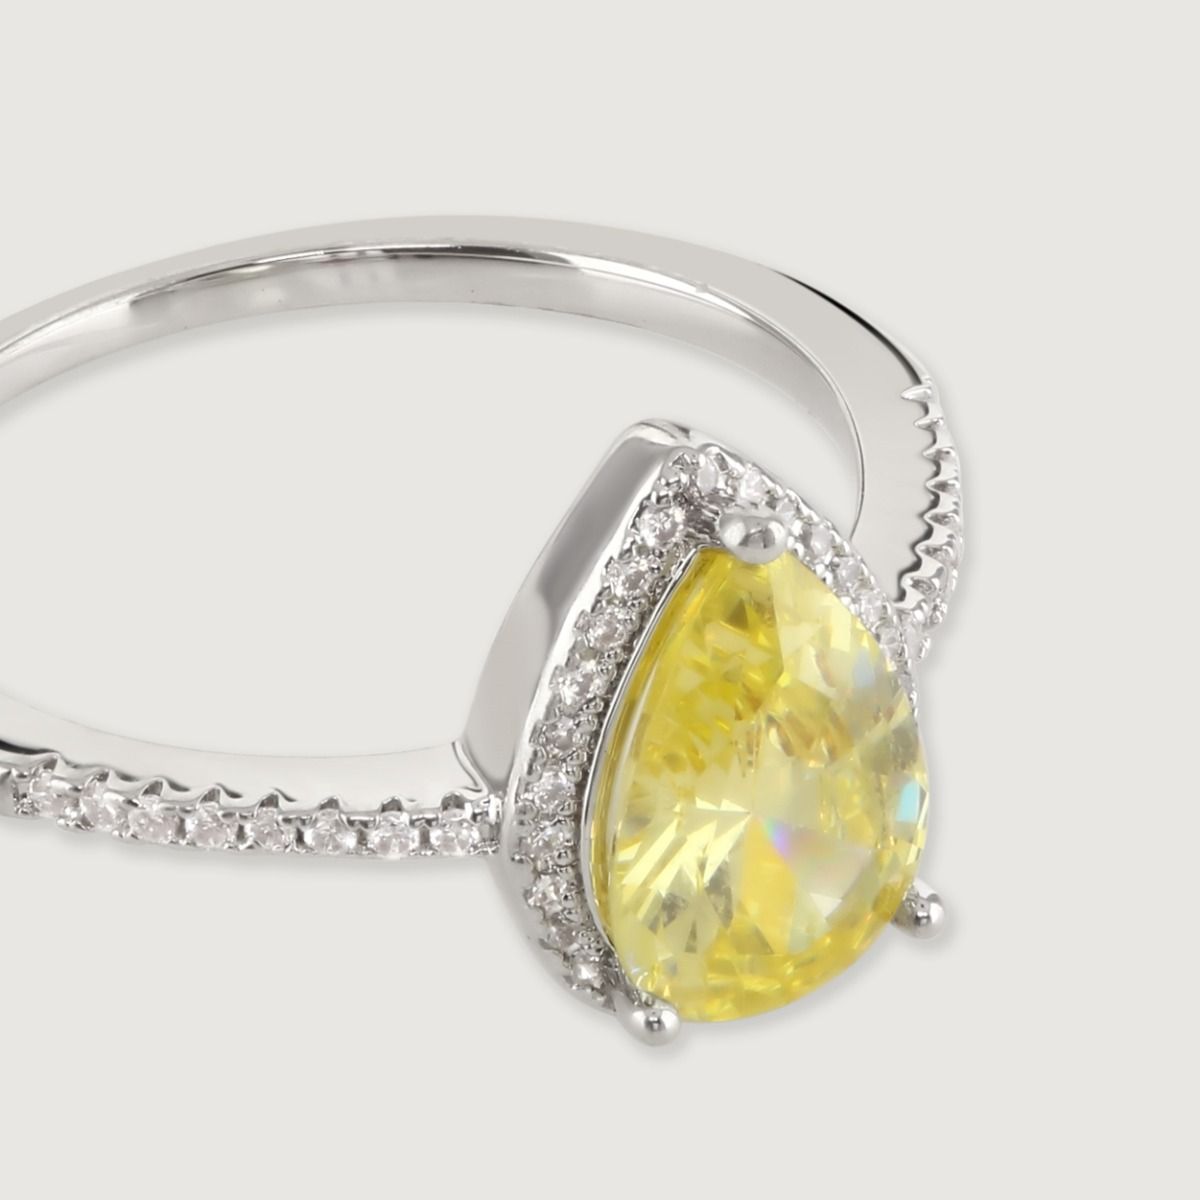 This beautiful ring features a dazzling pear cut canary centre stone set with a surround of flawlessly cut cubic zirconia stones. Wear to add timeless glamour to any look. 